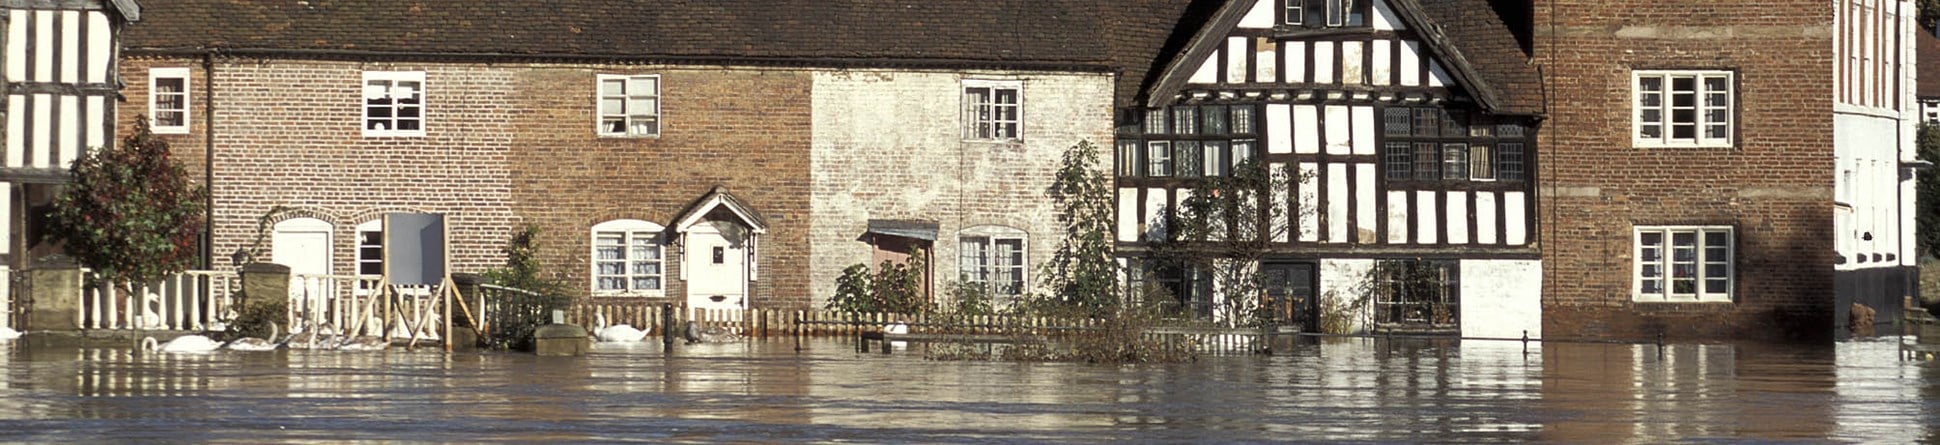 Image of houses flooded after the Severn burst its banks near Bewdley in Worcestershire